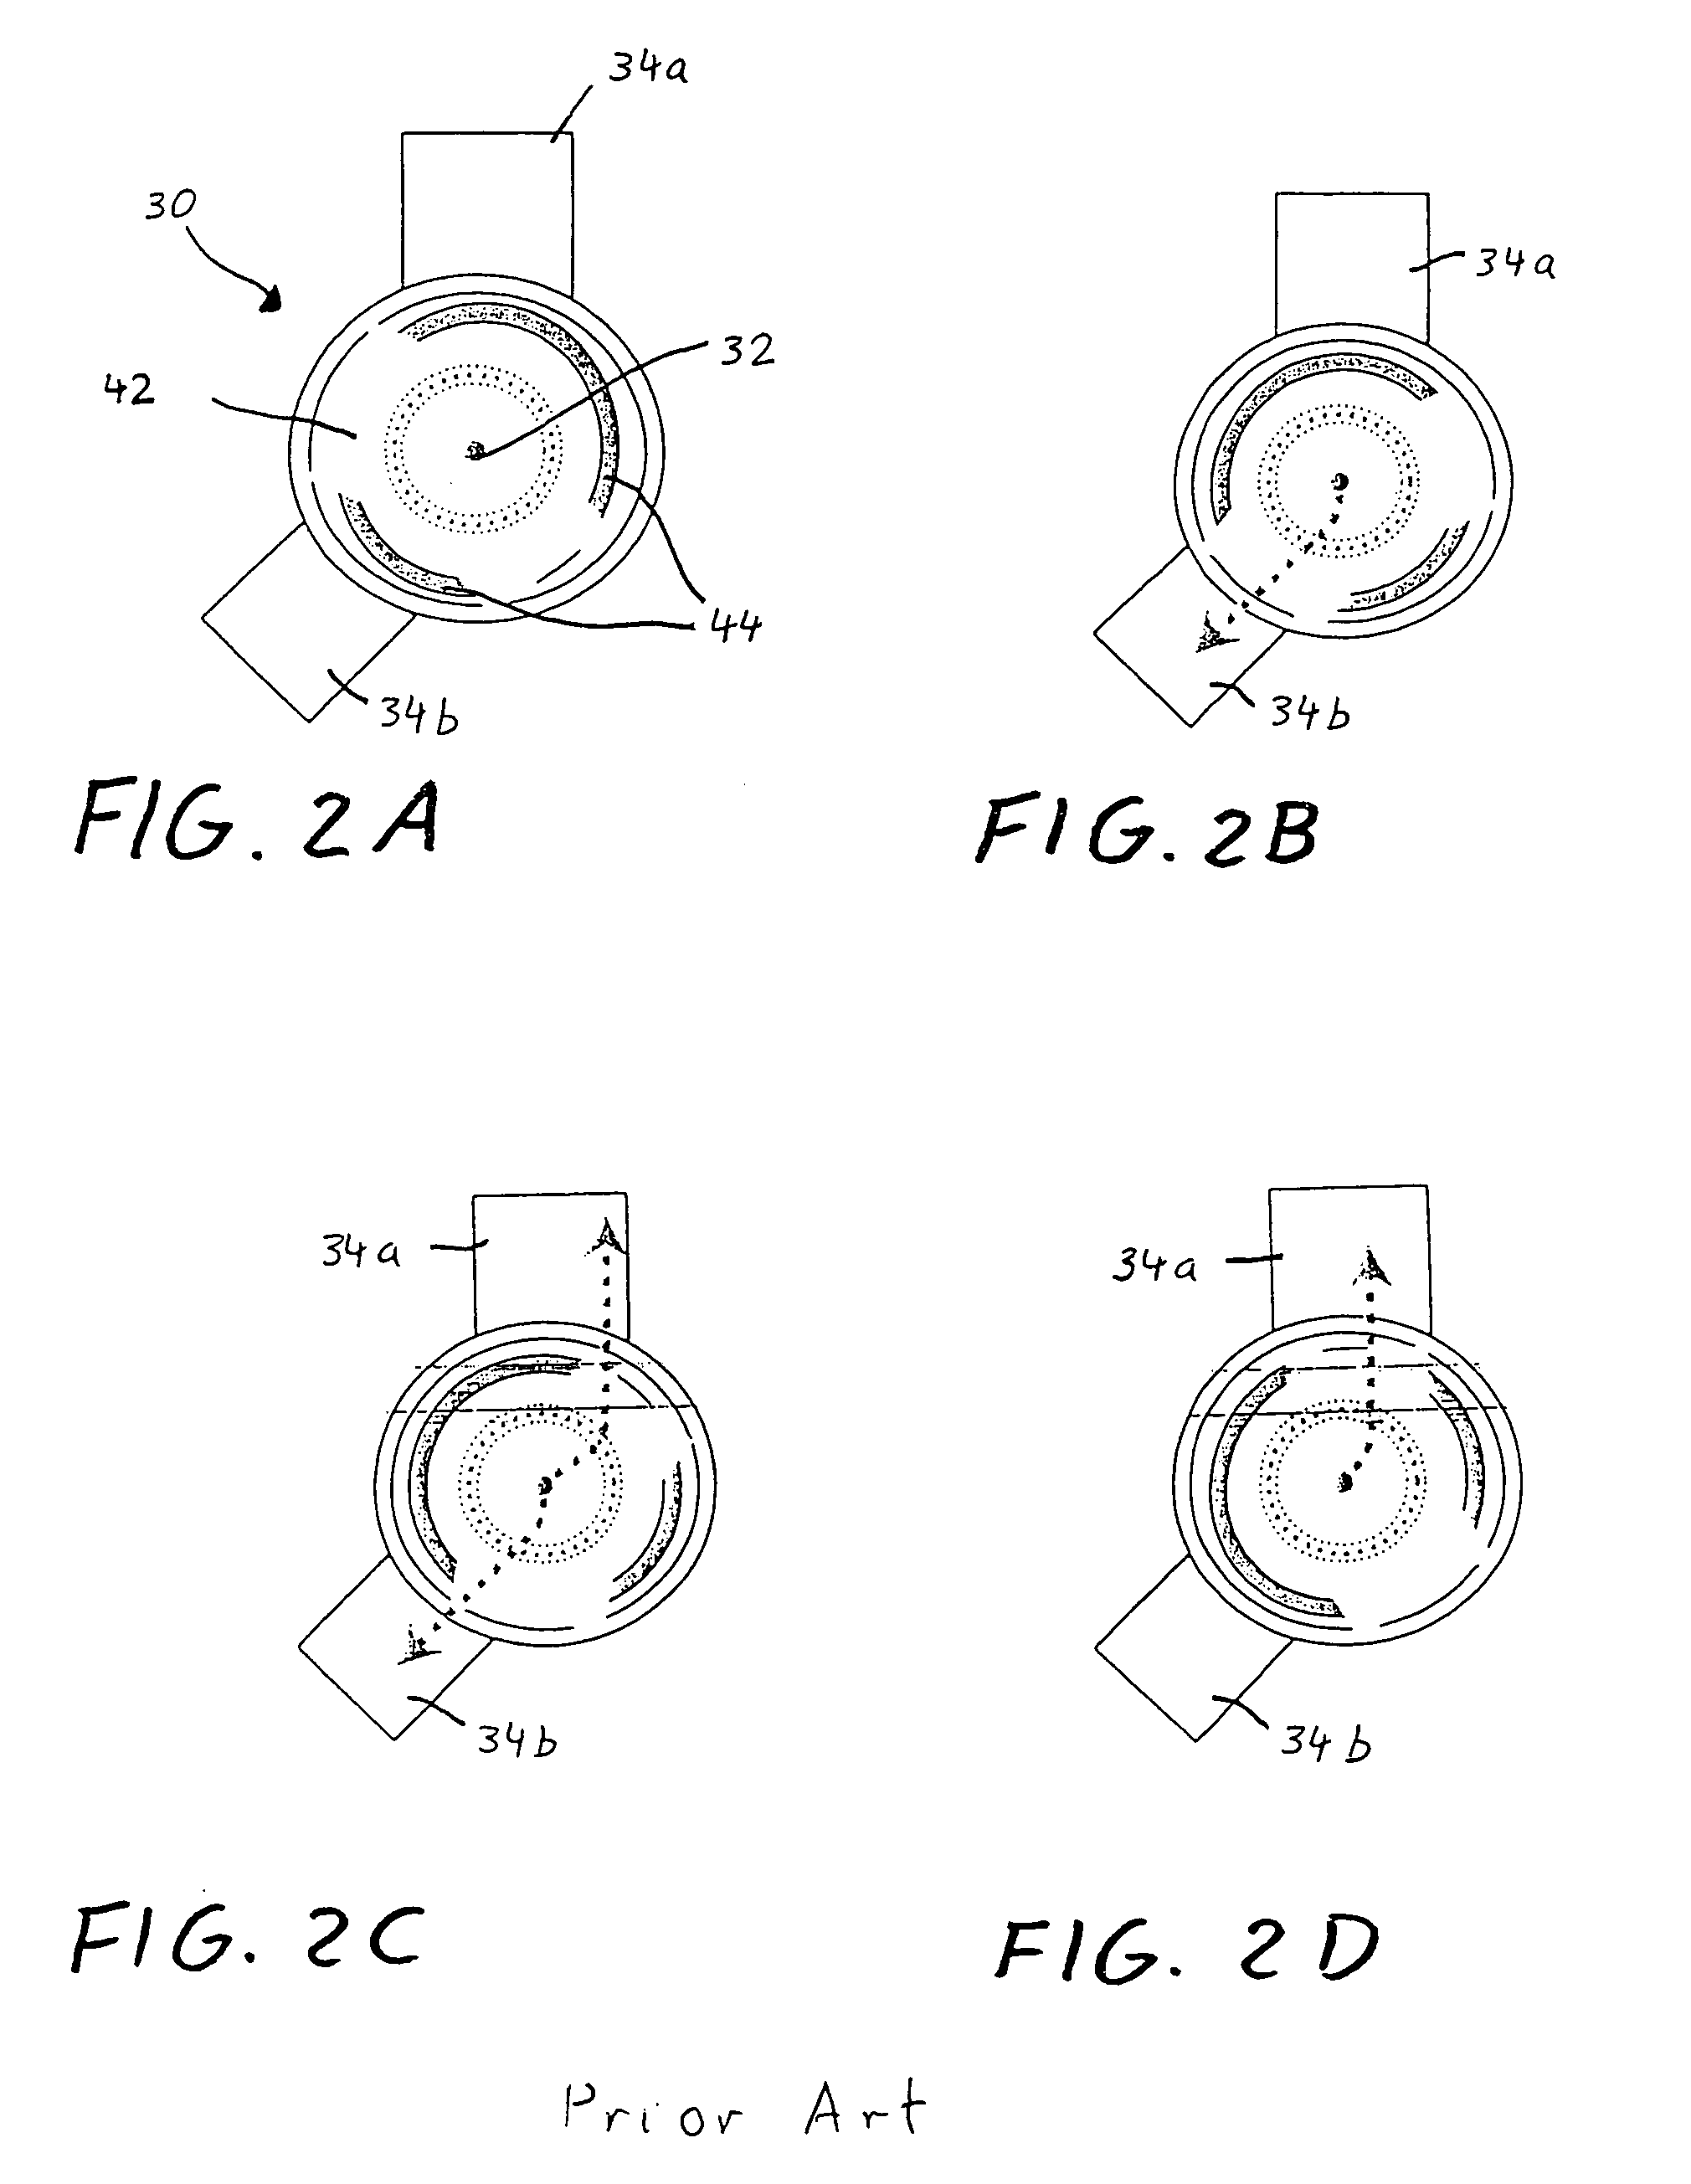 Thermostatic valve for a cooling system of an internal combustion engine